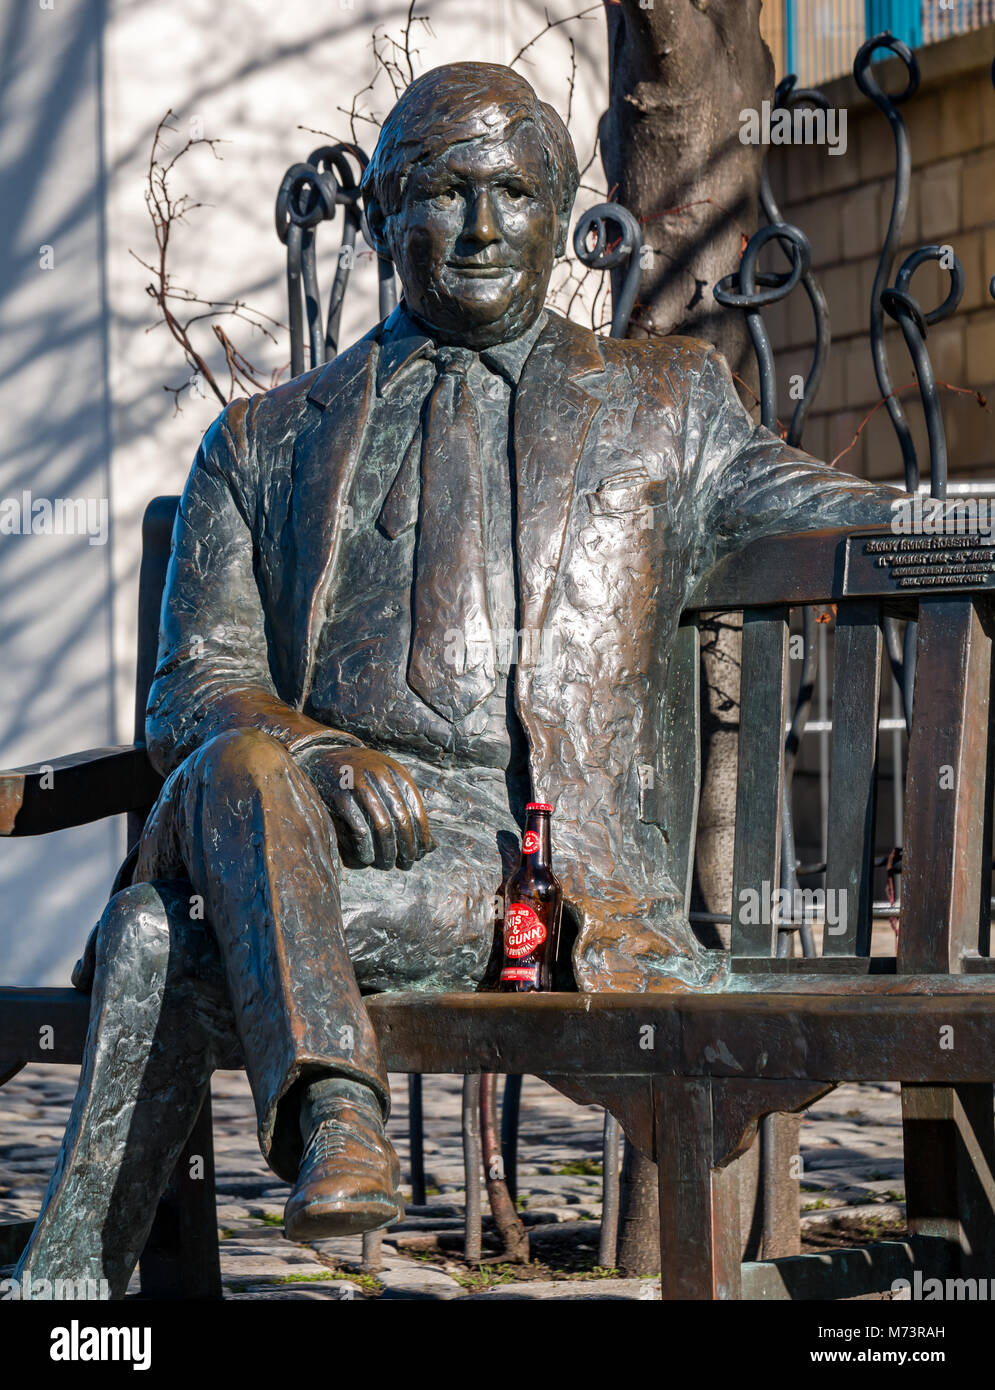 The Shore, Leith Harbour, Leith, Edinburgh, Scotland, United Kingdom, 8th March 2018. UK Weather: Spring weather along the Water of Leith. The life size bronze sculpture of businessman Sandy Irvine Robertson, by sculptor Lucy Poett, with a bottle of Innis & Gunn beer Stock Photo